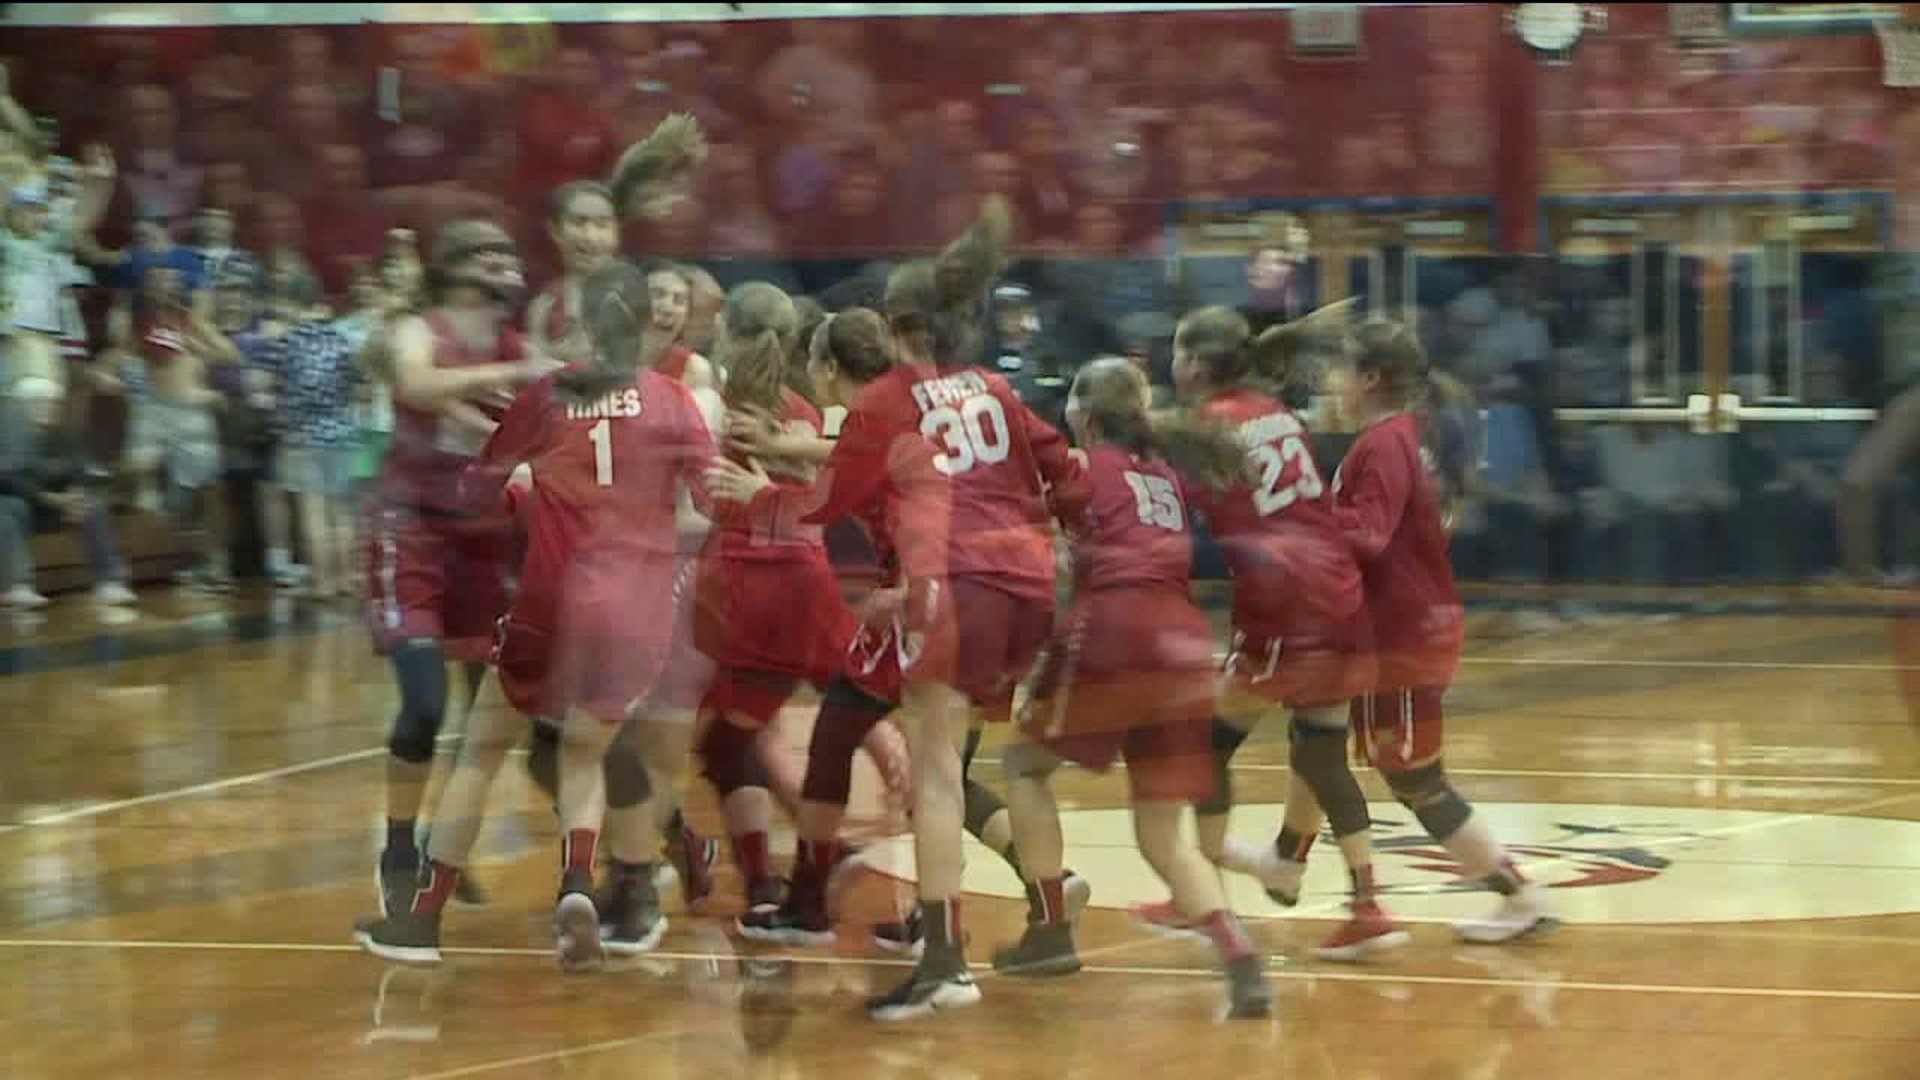 Holy Redeemer Girls Capture Wyoming Valley Conference Division 2 Championship